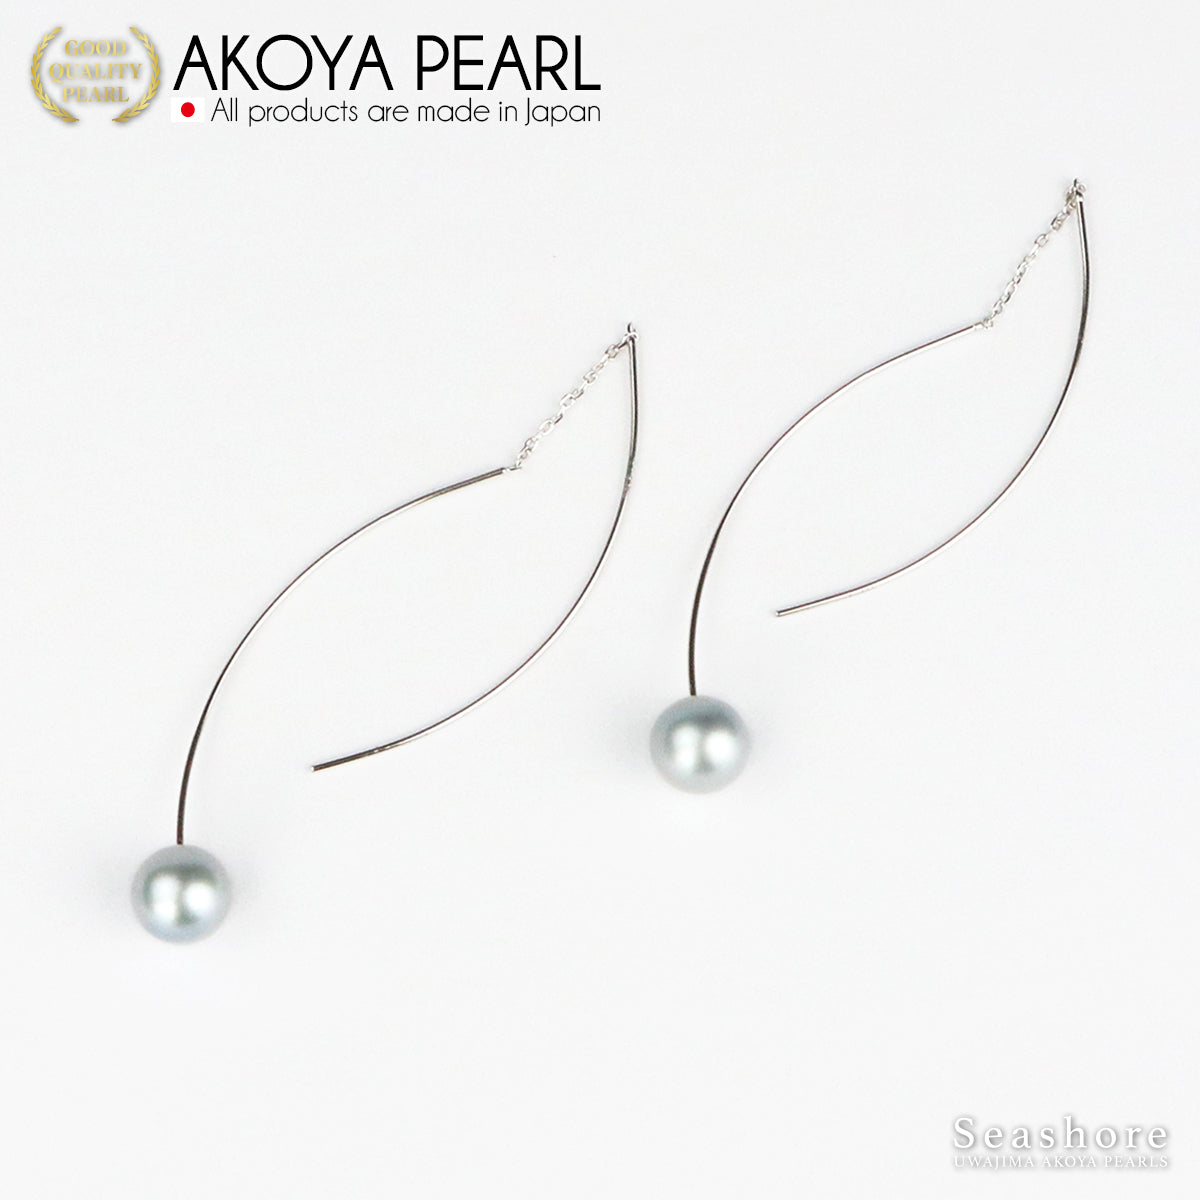 [Natural White] [Gray] Pearl American Earrings Straight Line [8.0-8.5mm] SV925 Akoya Akoya Pearl Accessories Free Gift Included Storage Case Included